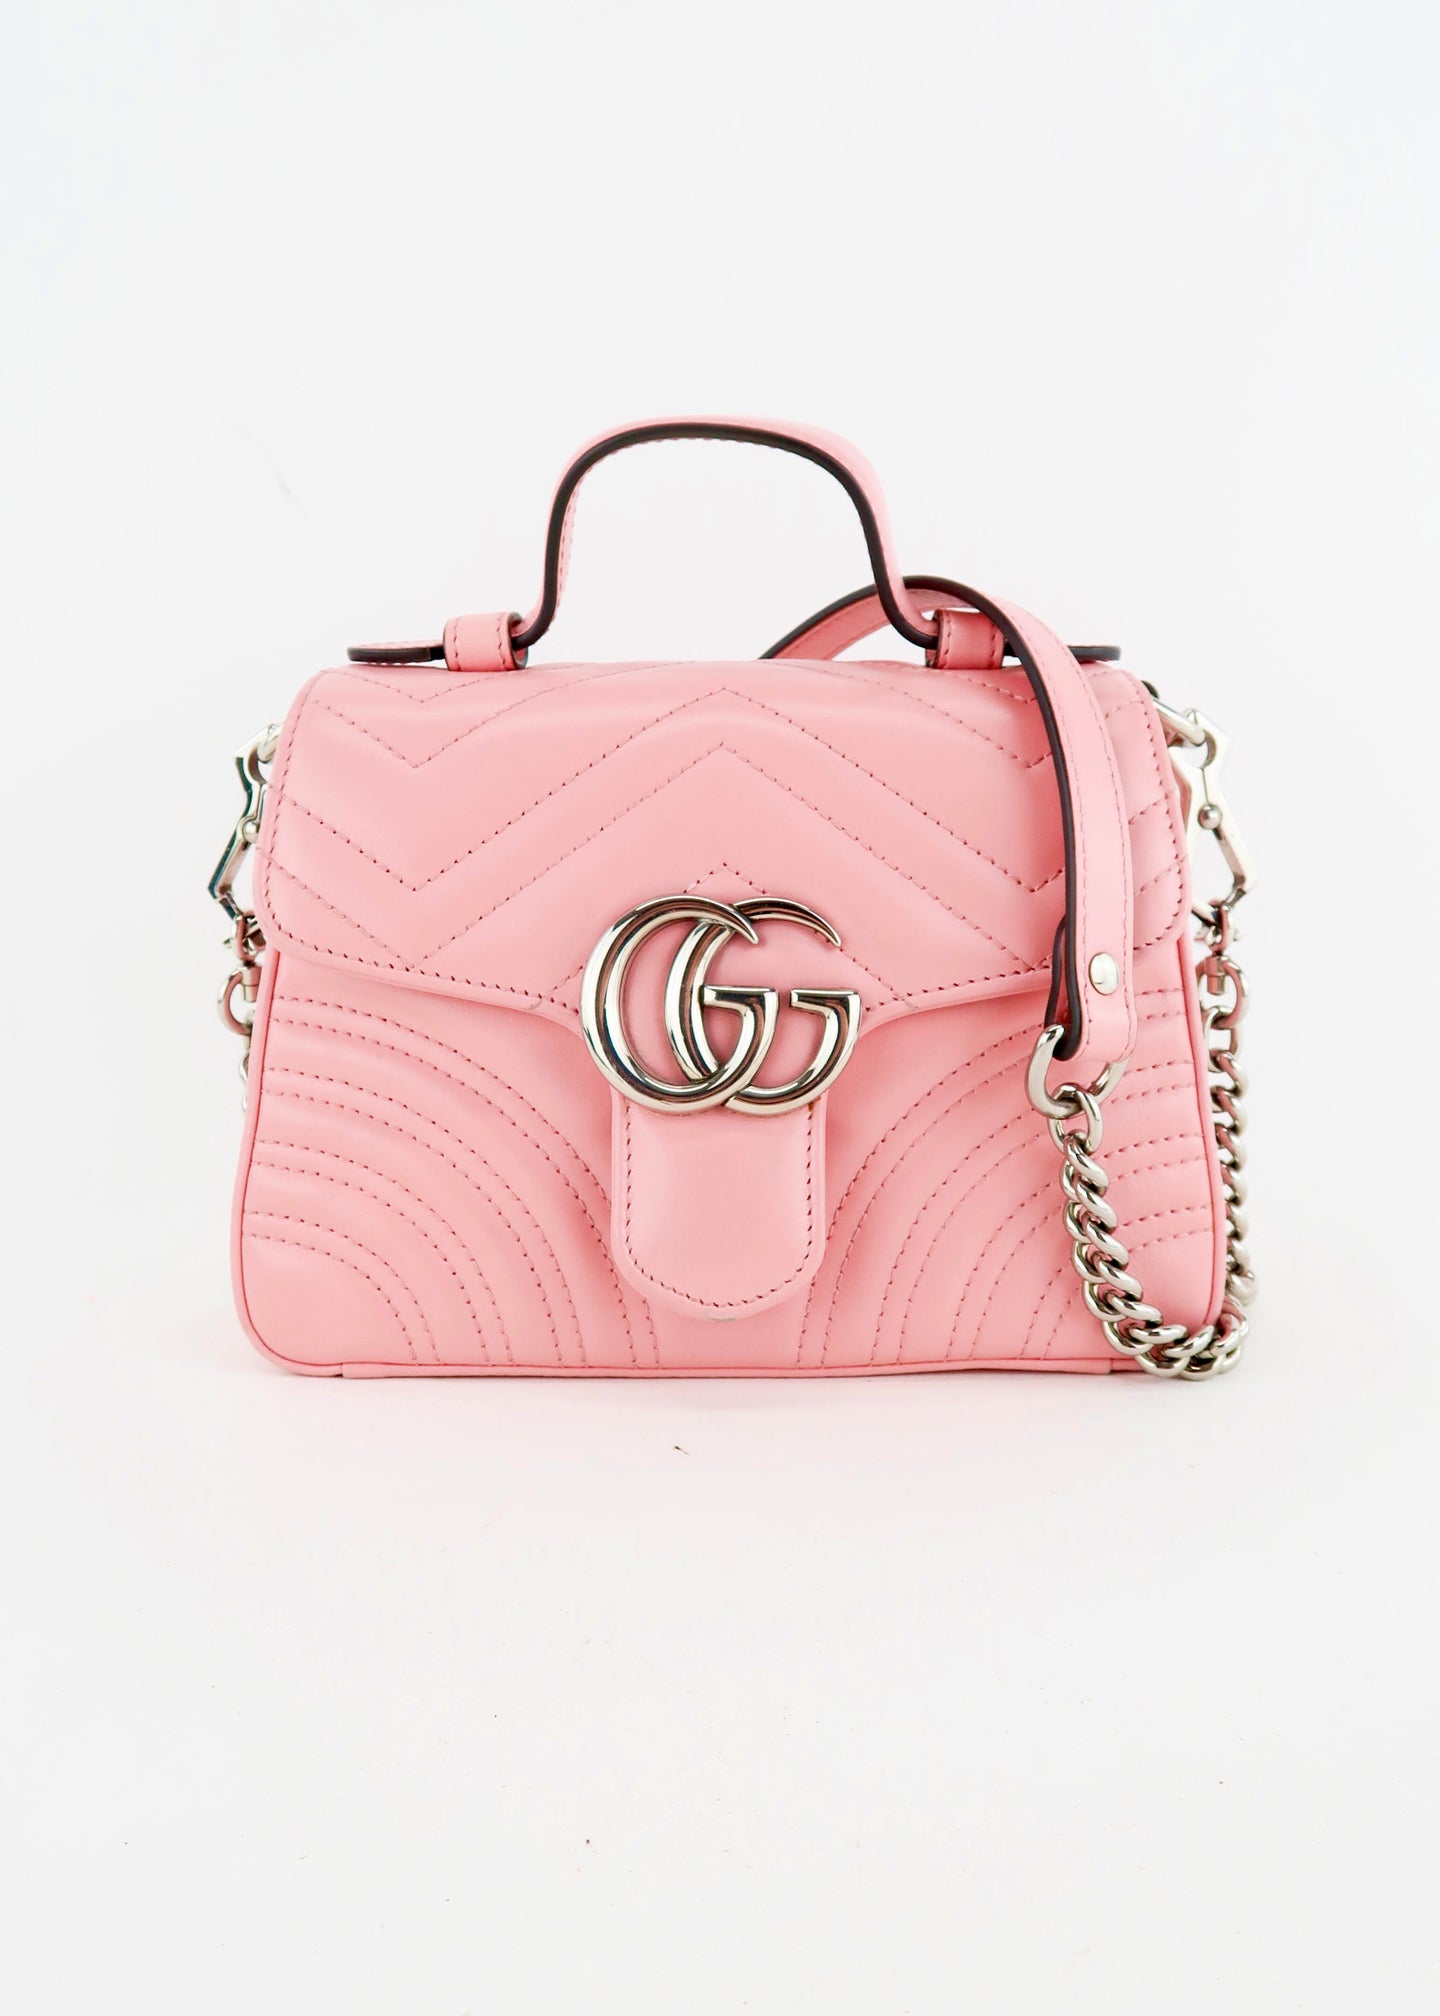 Gucci Marmont Matlasse Top Handle Pink